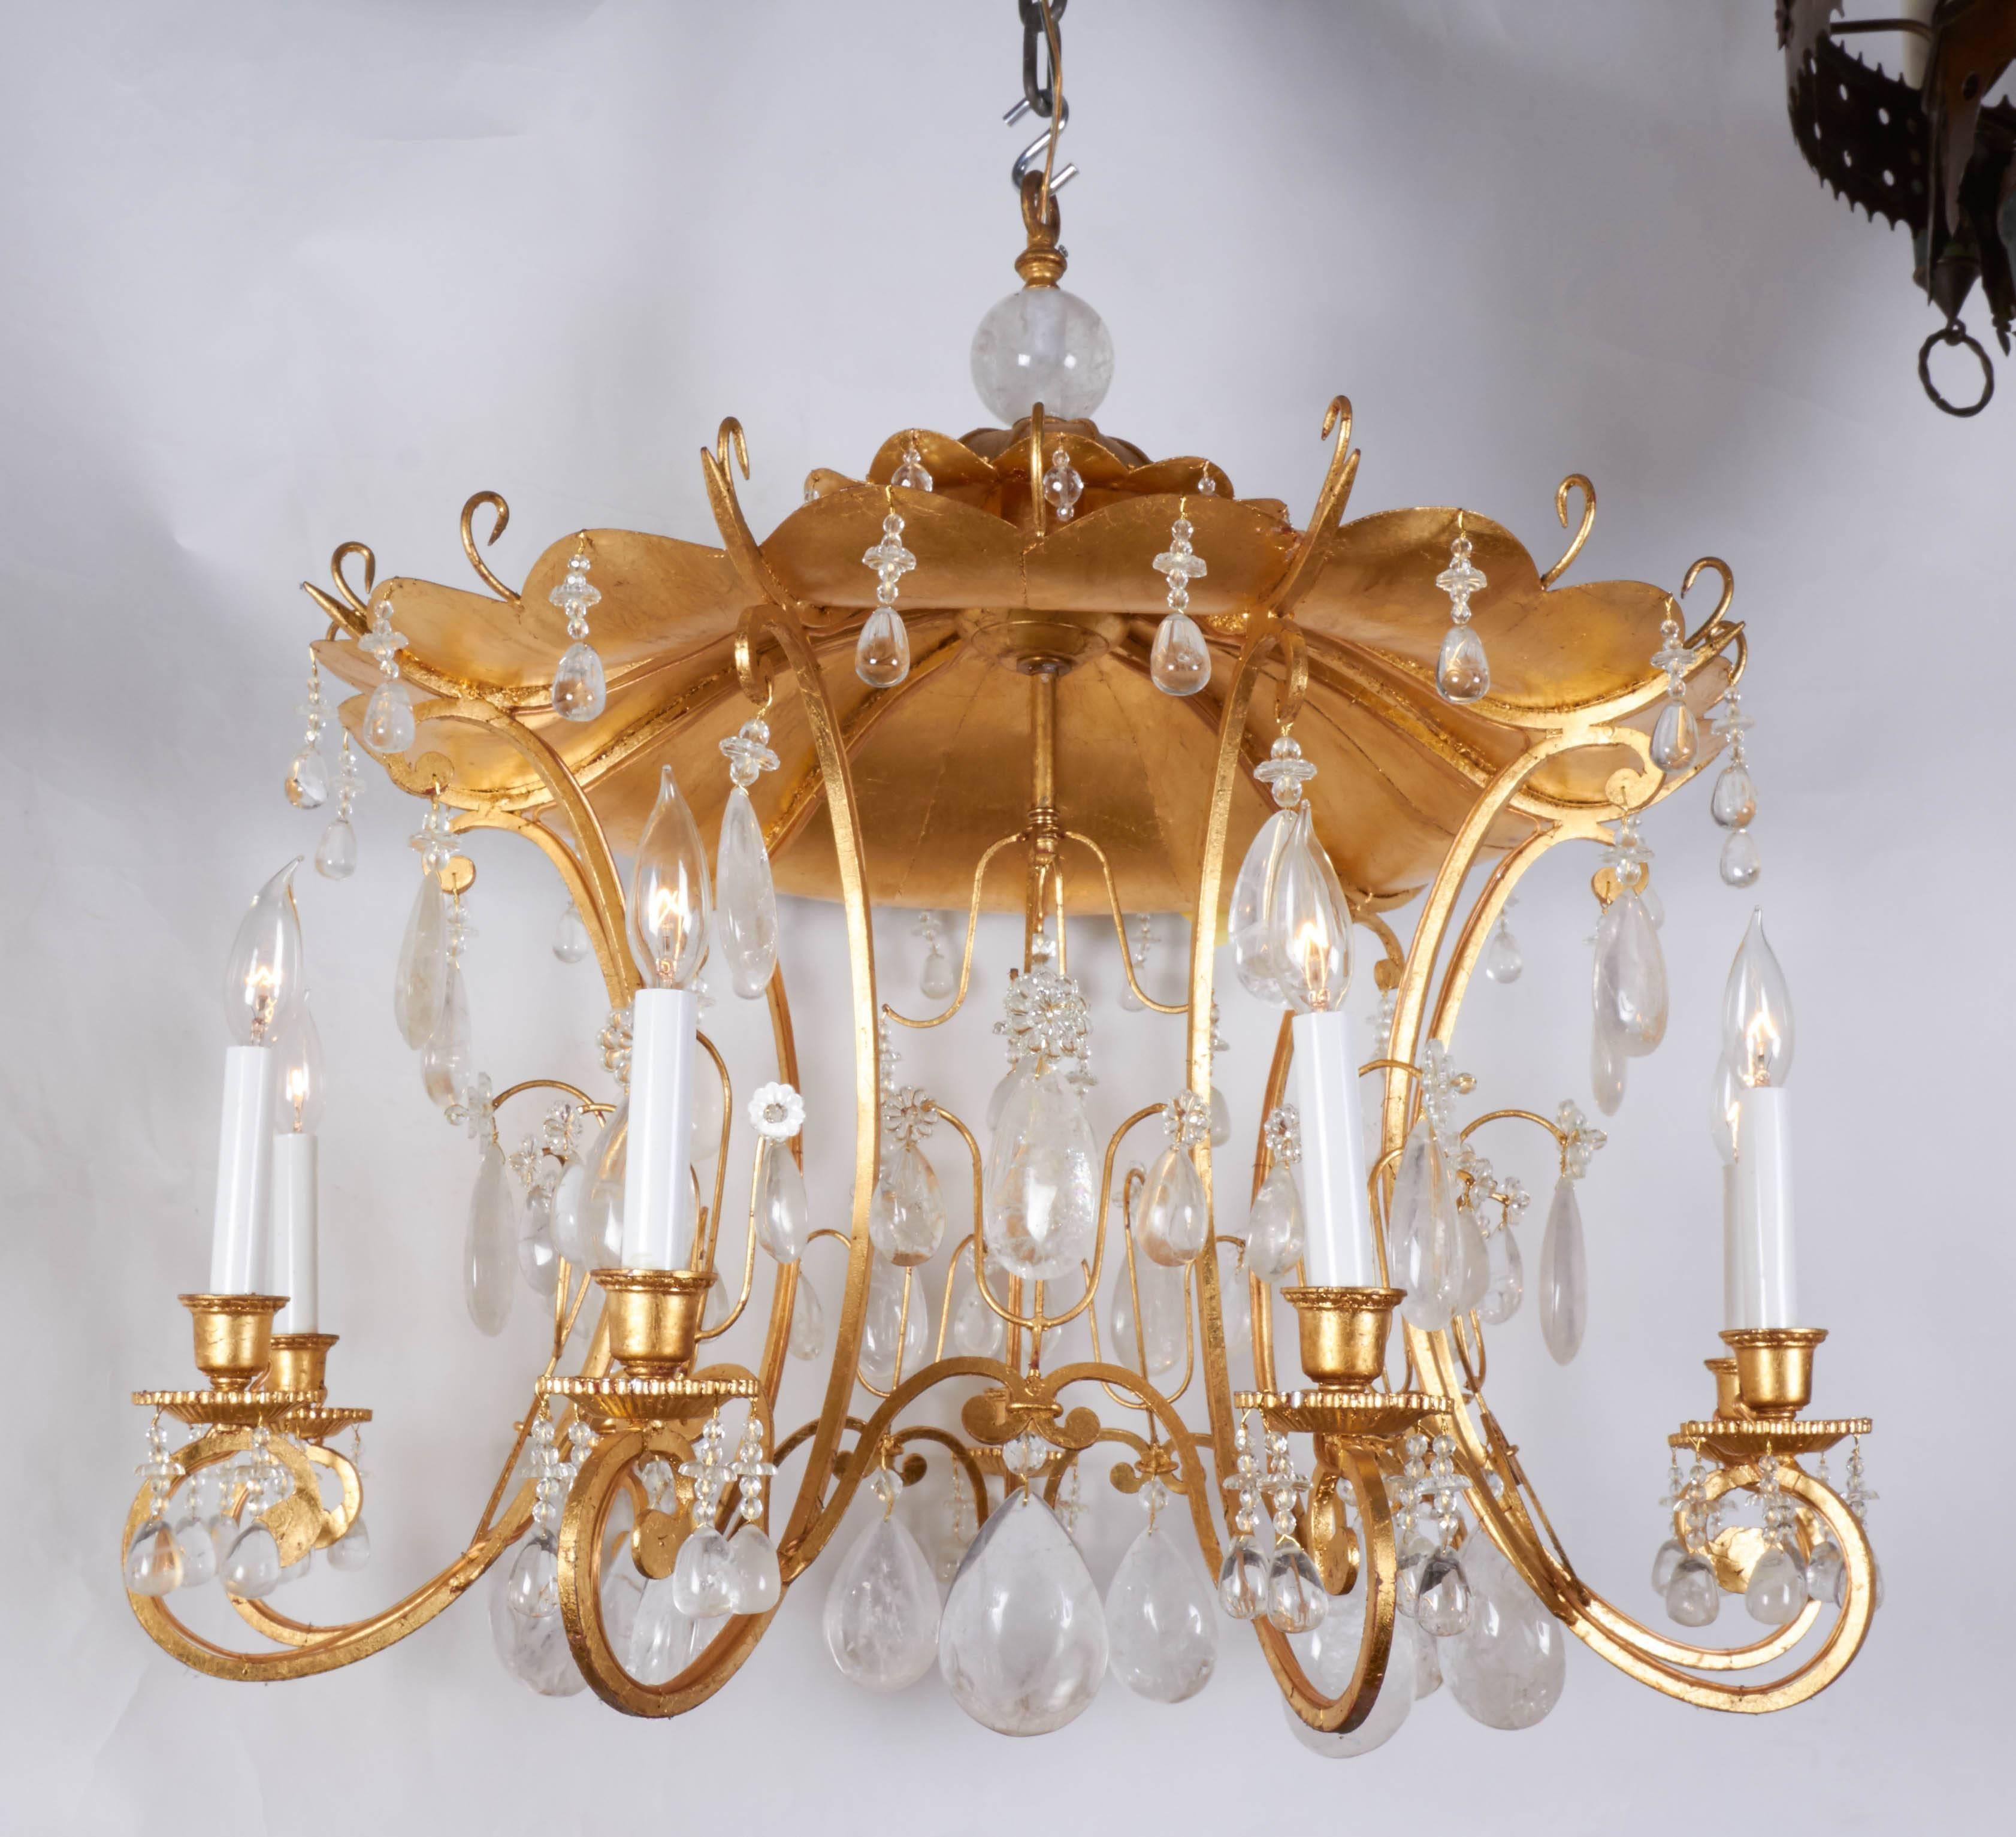 A new chinoiserie style rock crystal and gilt metal eight-light chandelier, the pagoda with eight out-scrolled candle-branches suspending faceted rock crystal drops.